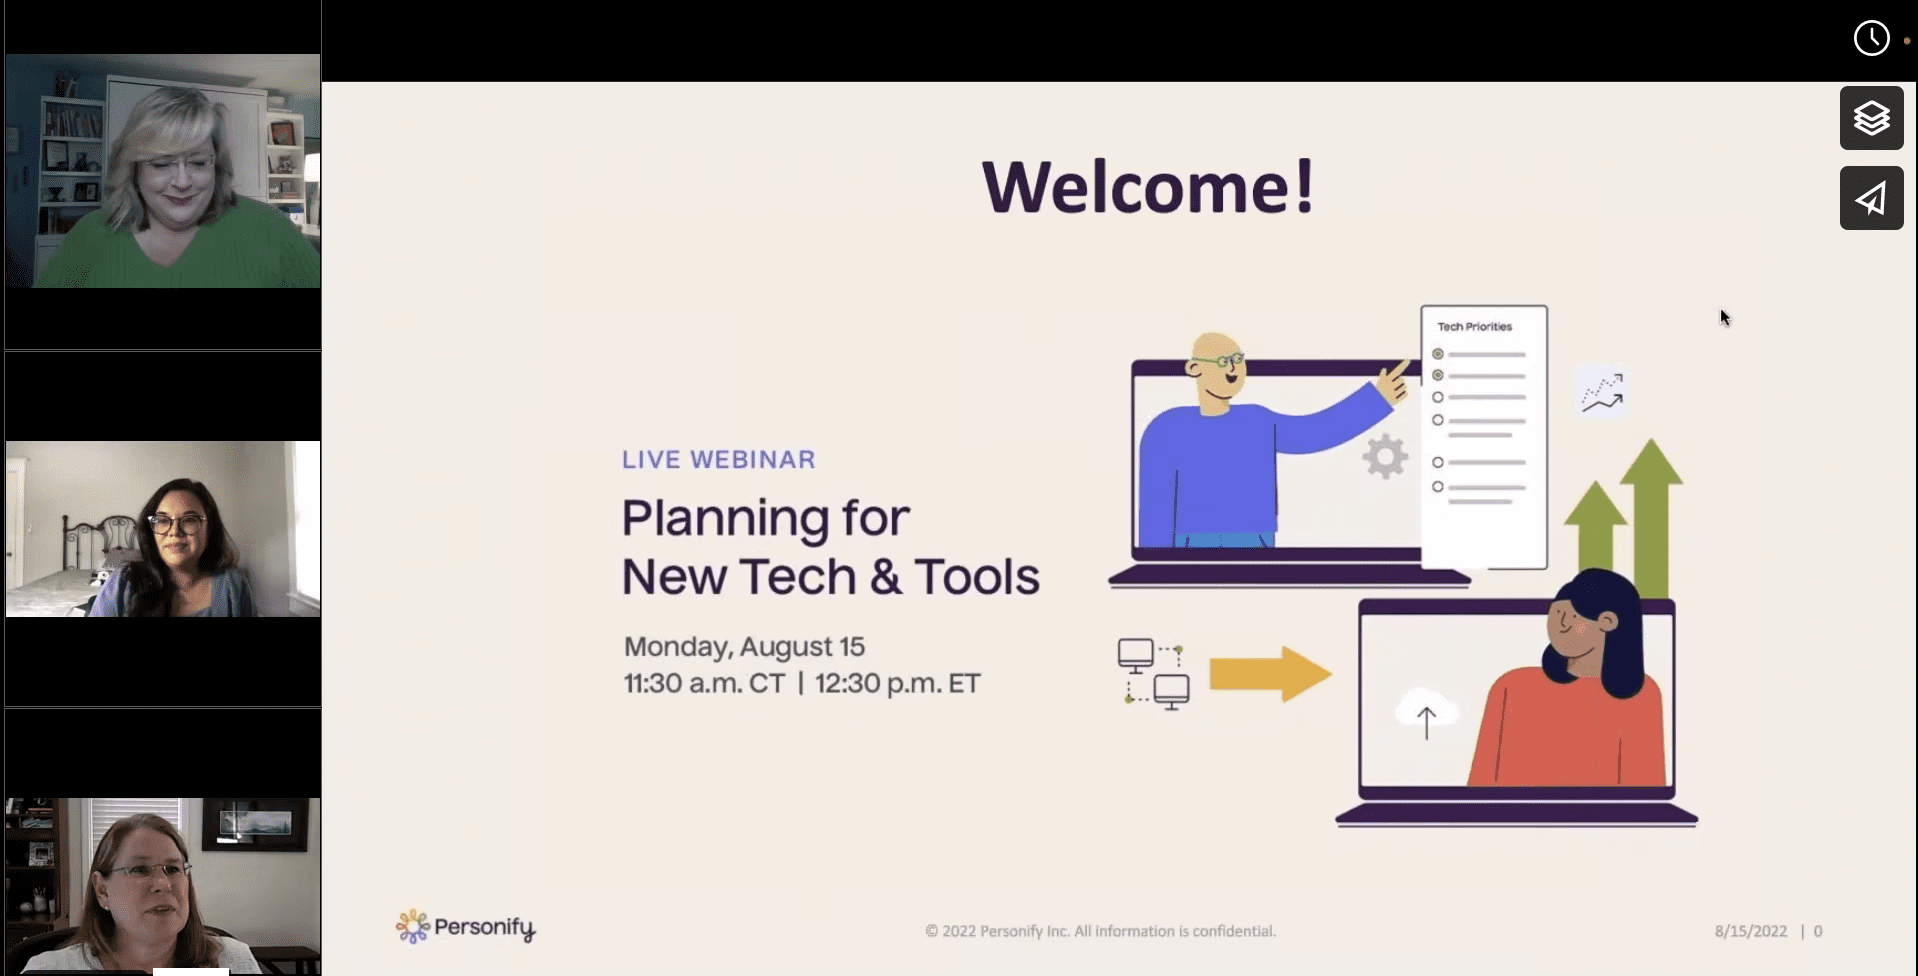 Title slide of "Planning for New Tech & Tools" with three female speaker images on the left-hand side.